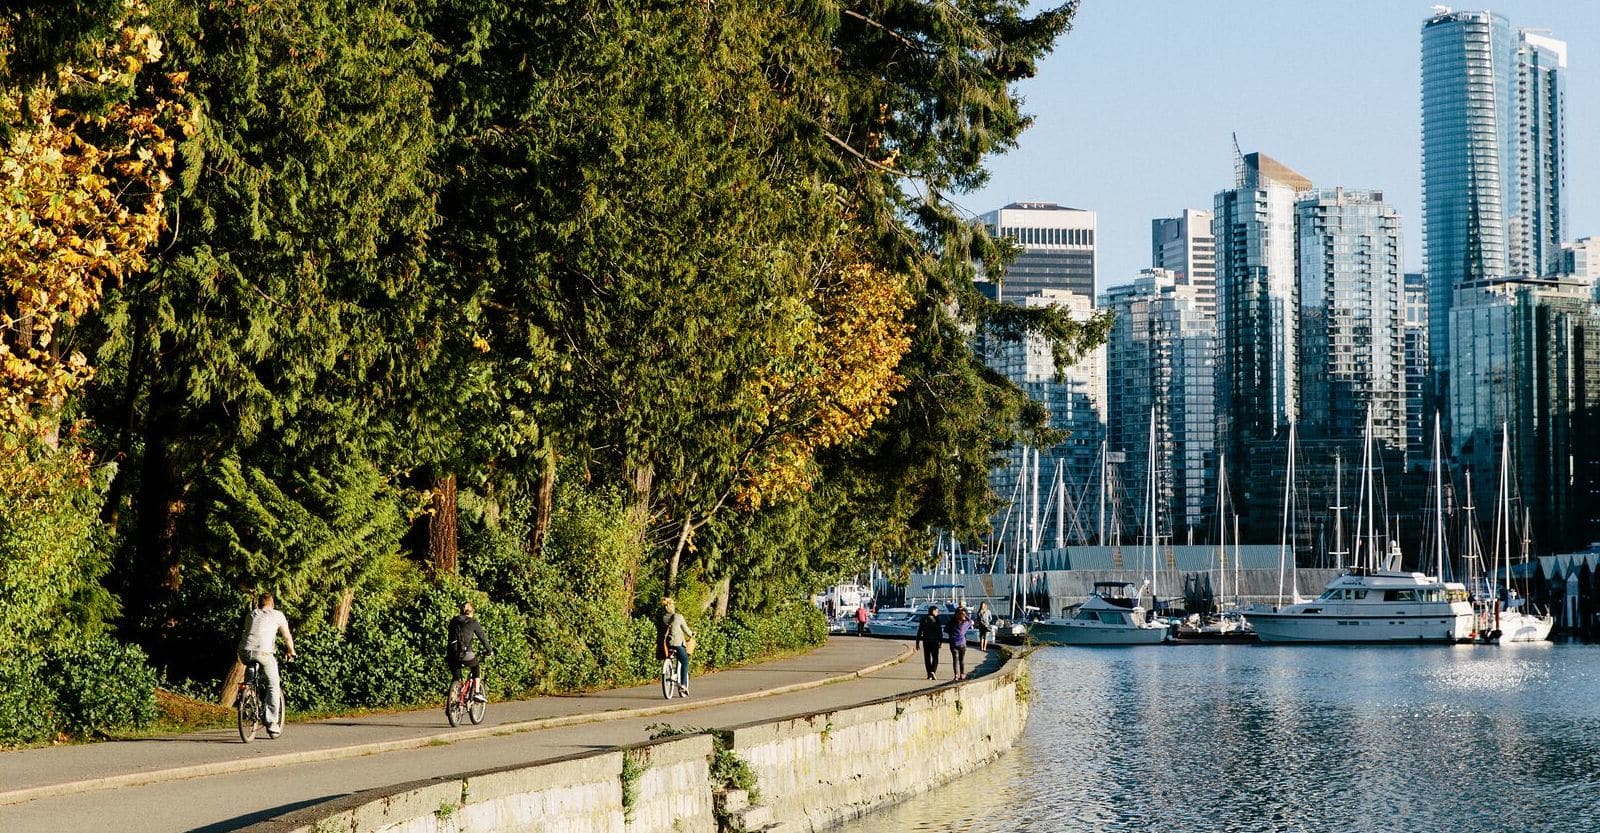  Top 10 fun things to do in Vancouver this summer